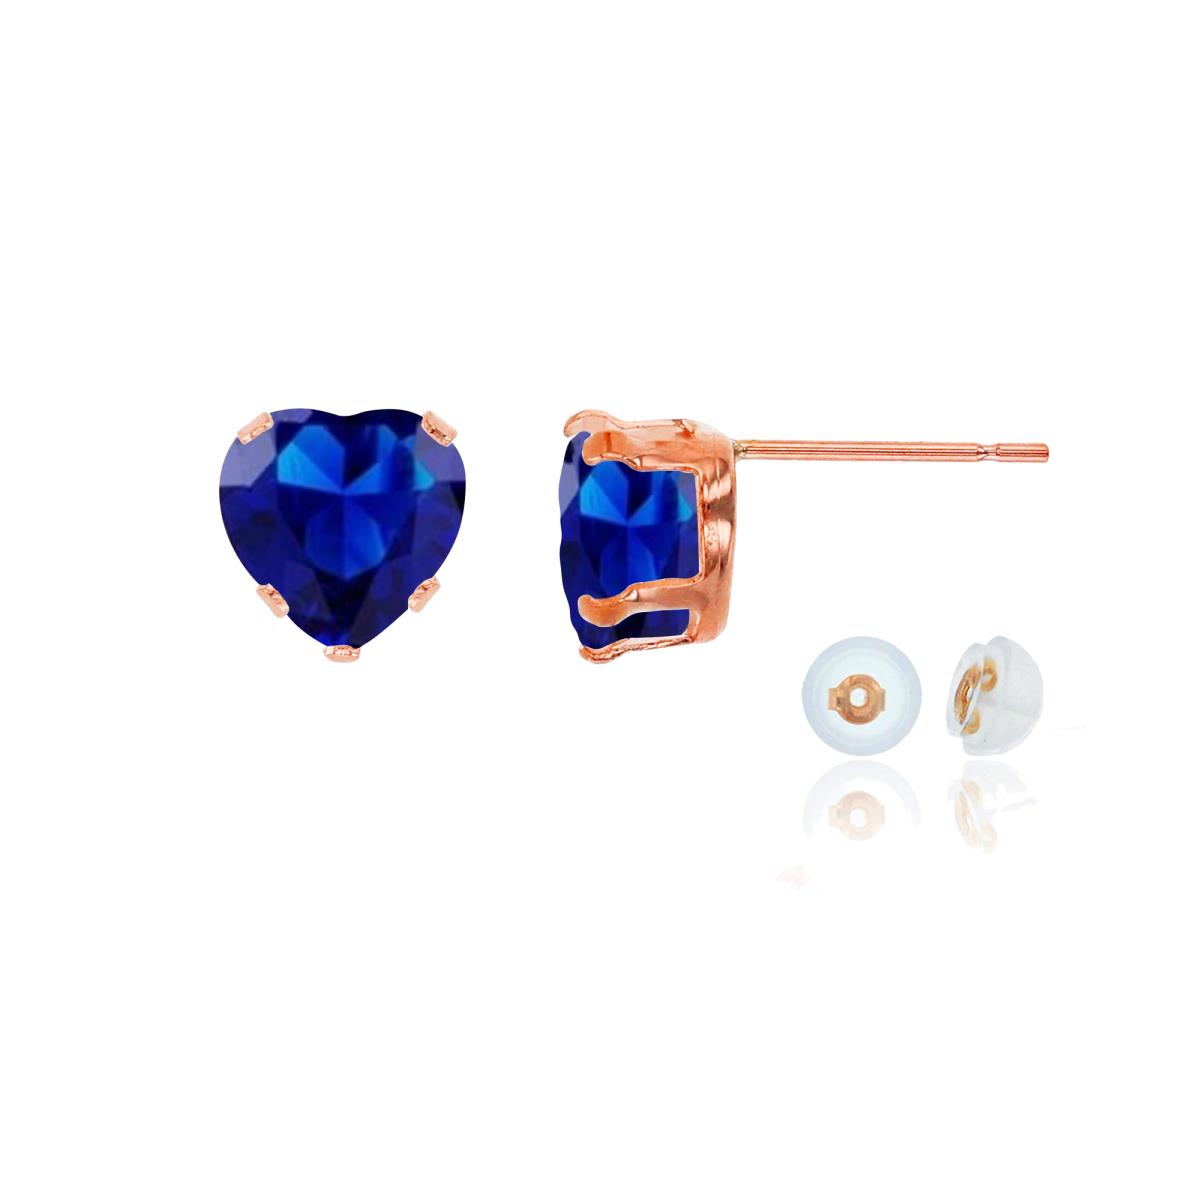 10K Rose Gold 5x5mm Heart Cr Blue Sapphire Stud Earring with Silicone Back